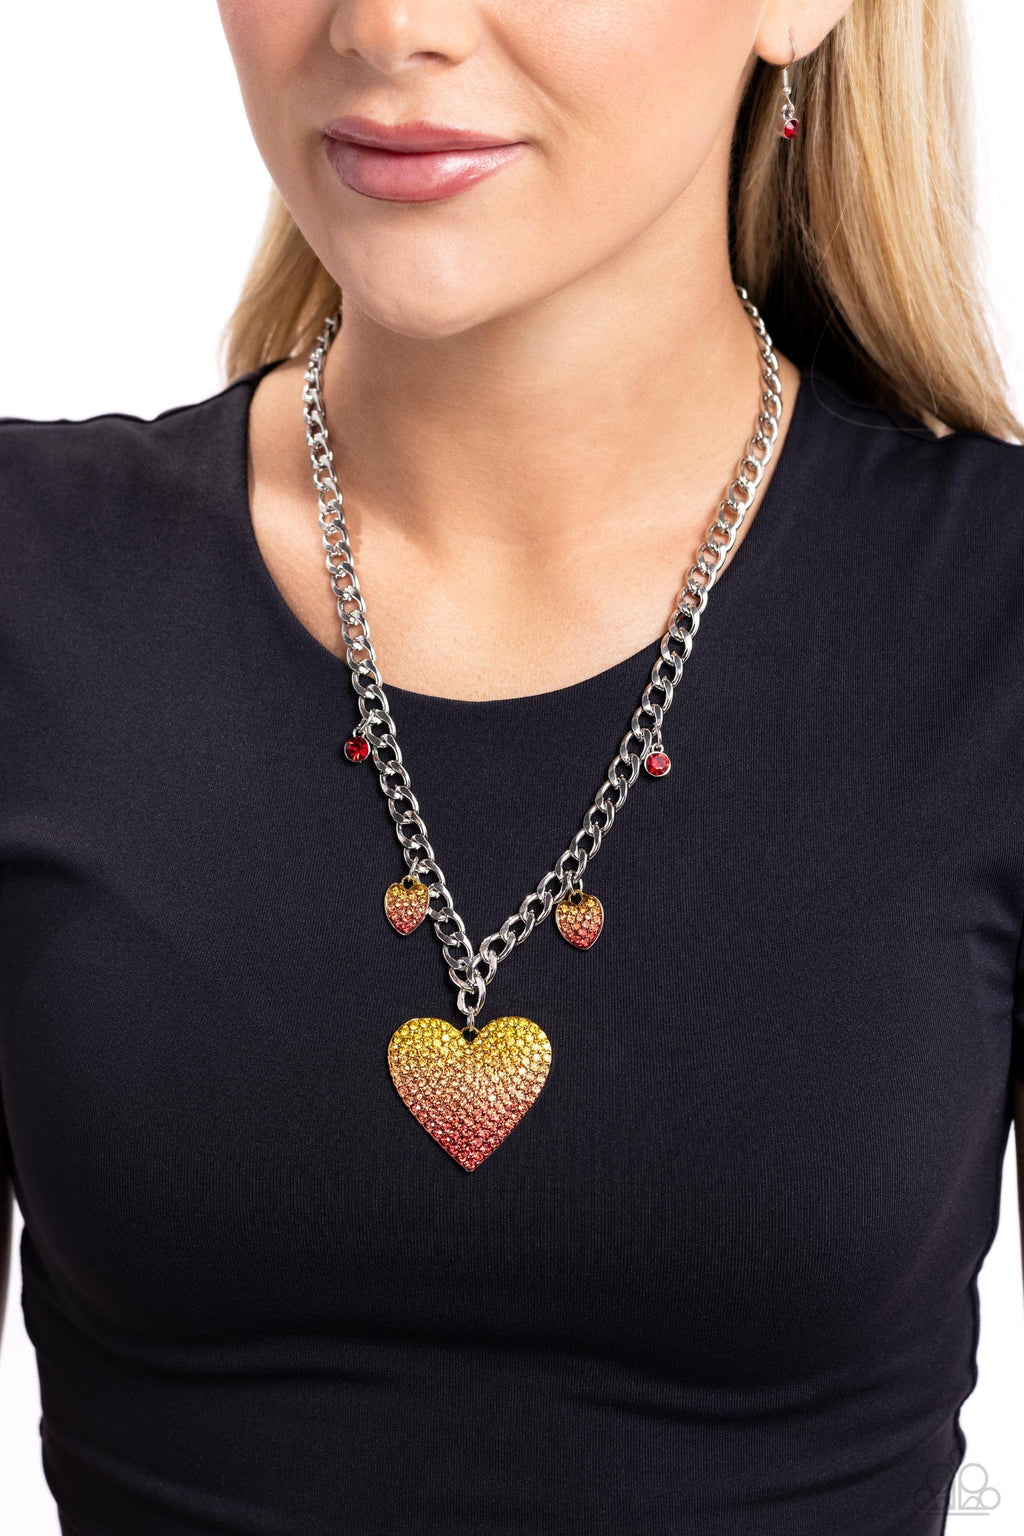 Paparazzi - For the Most HEART - Red Necklace